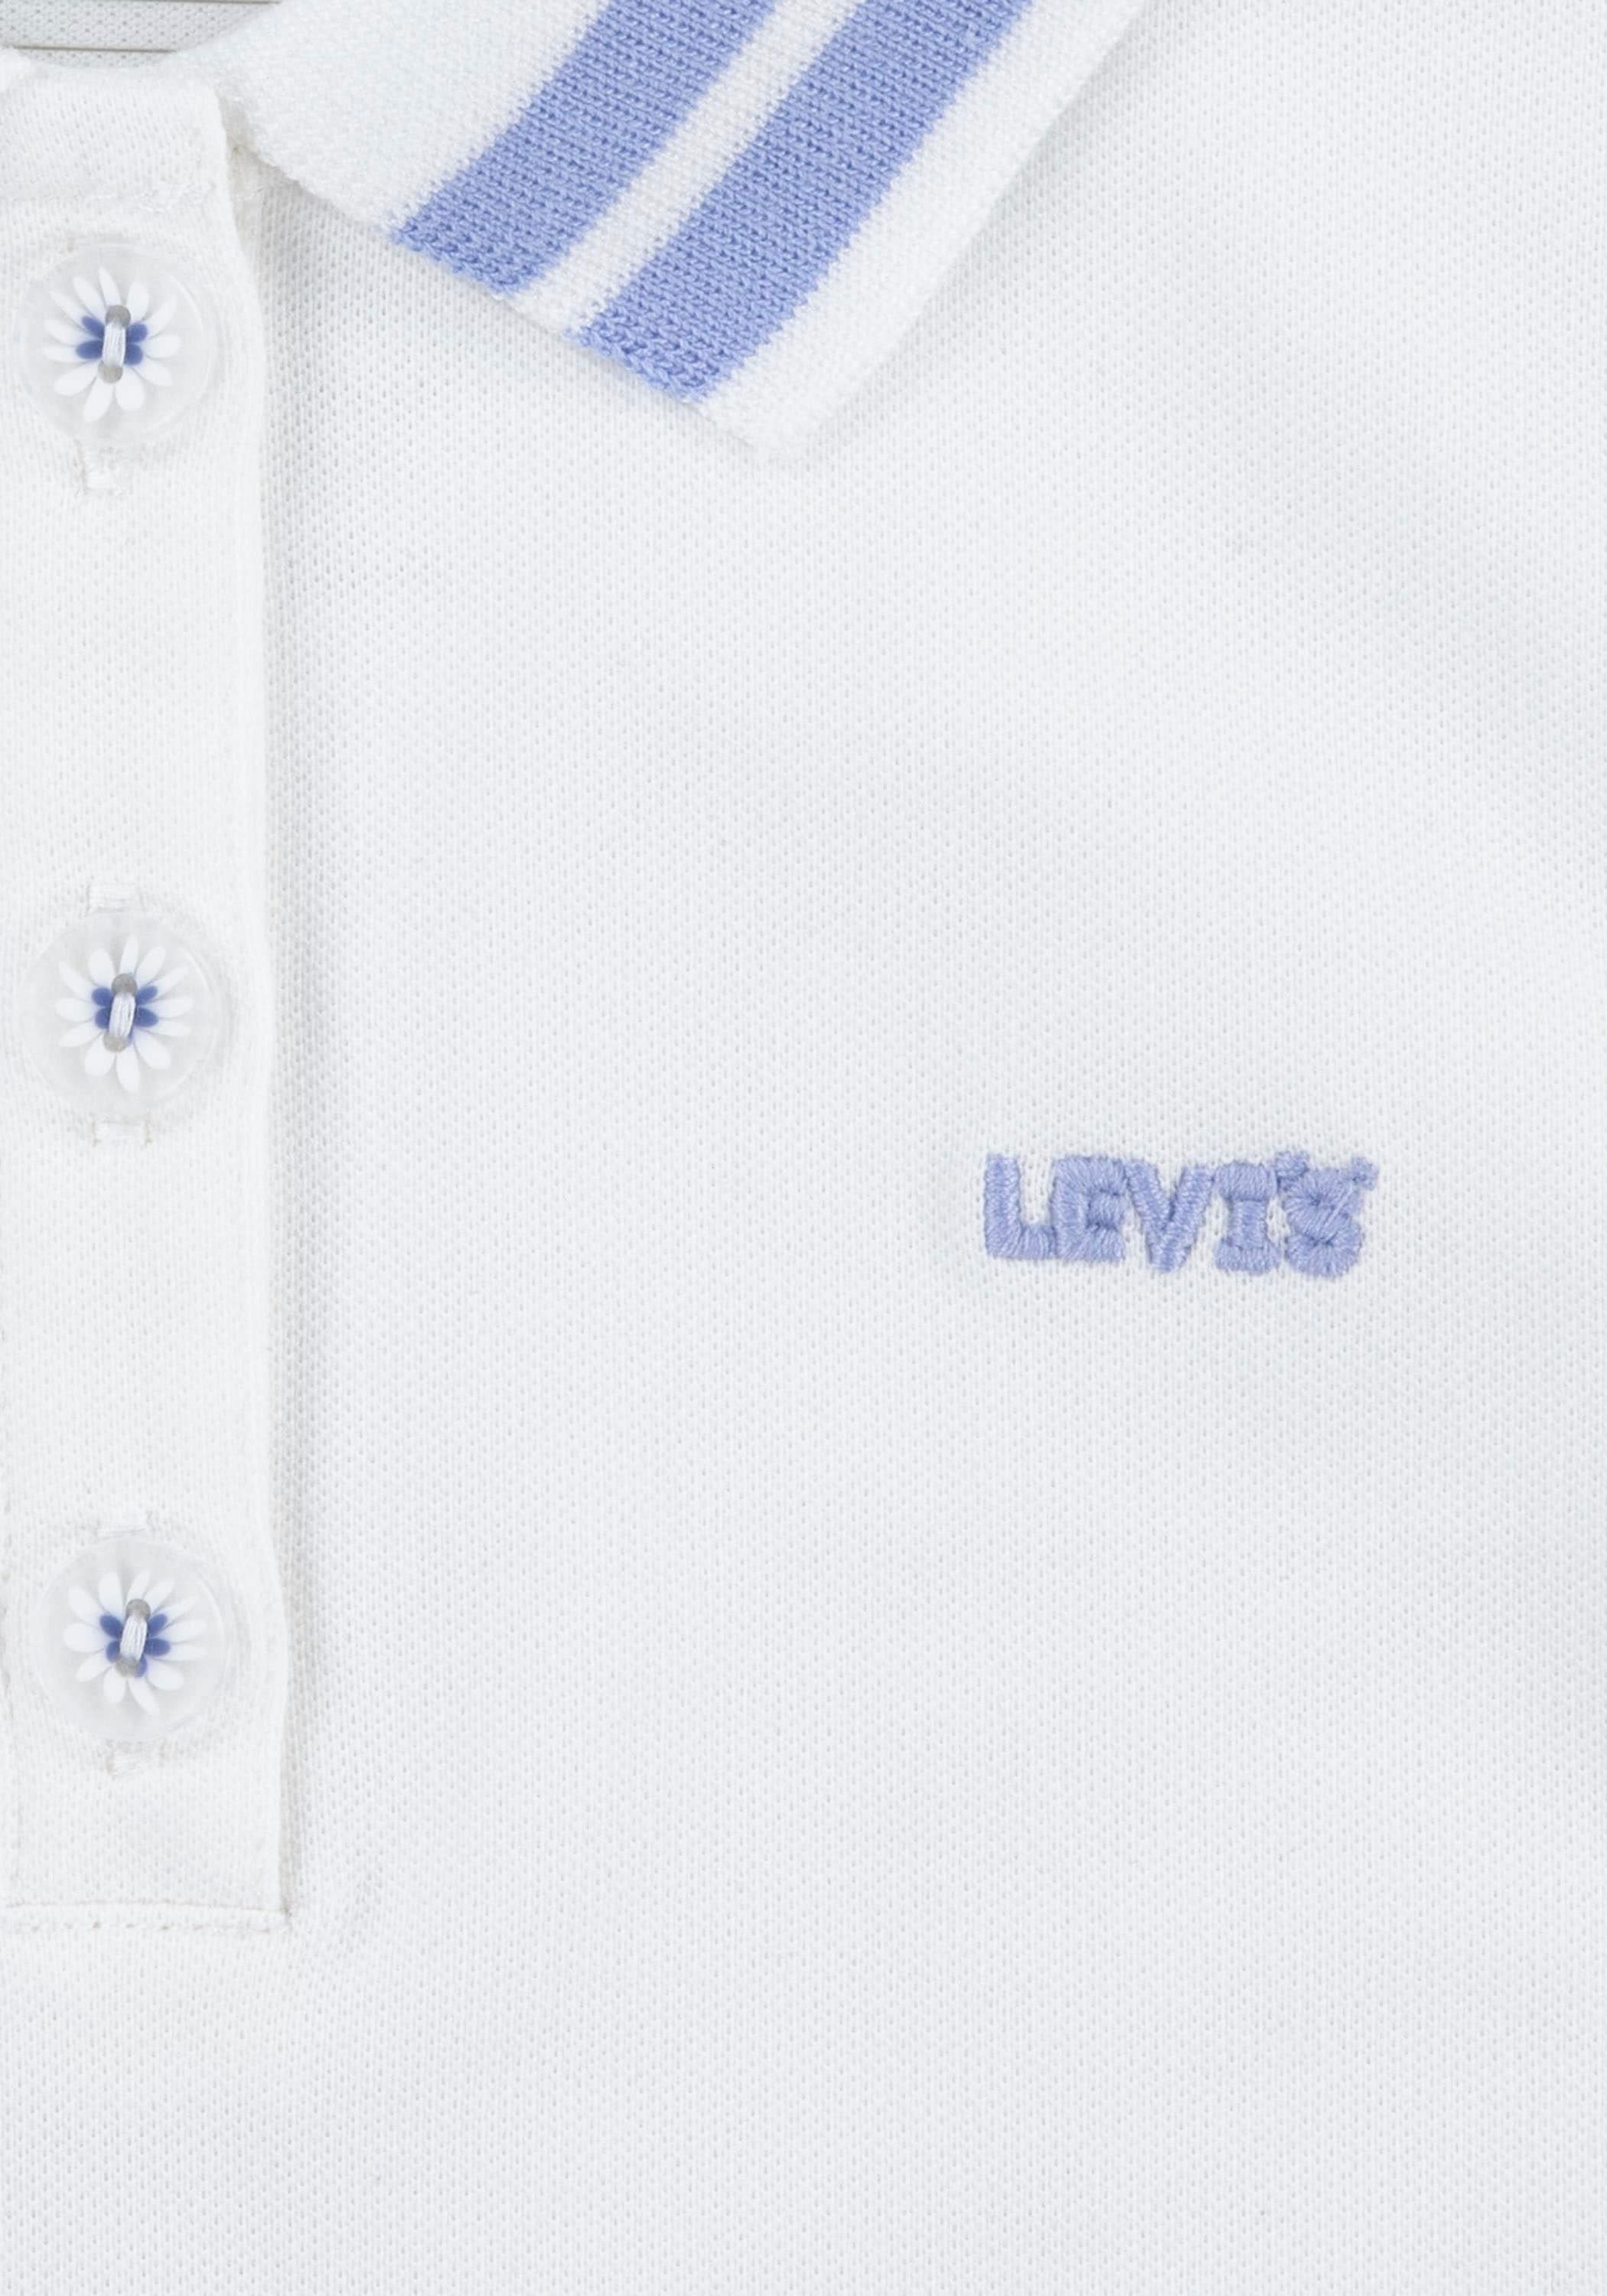 Levi's® Kids Shirttop »LVG POLO TANK TOP«, for GIRLS